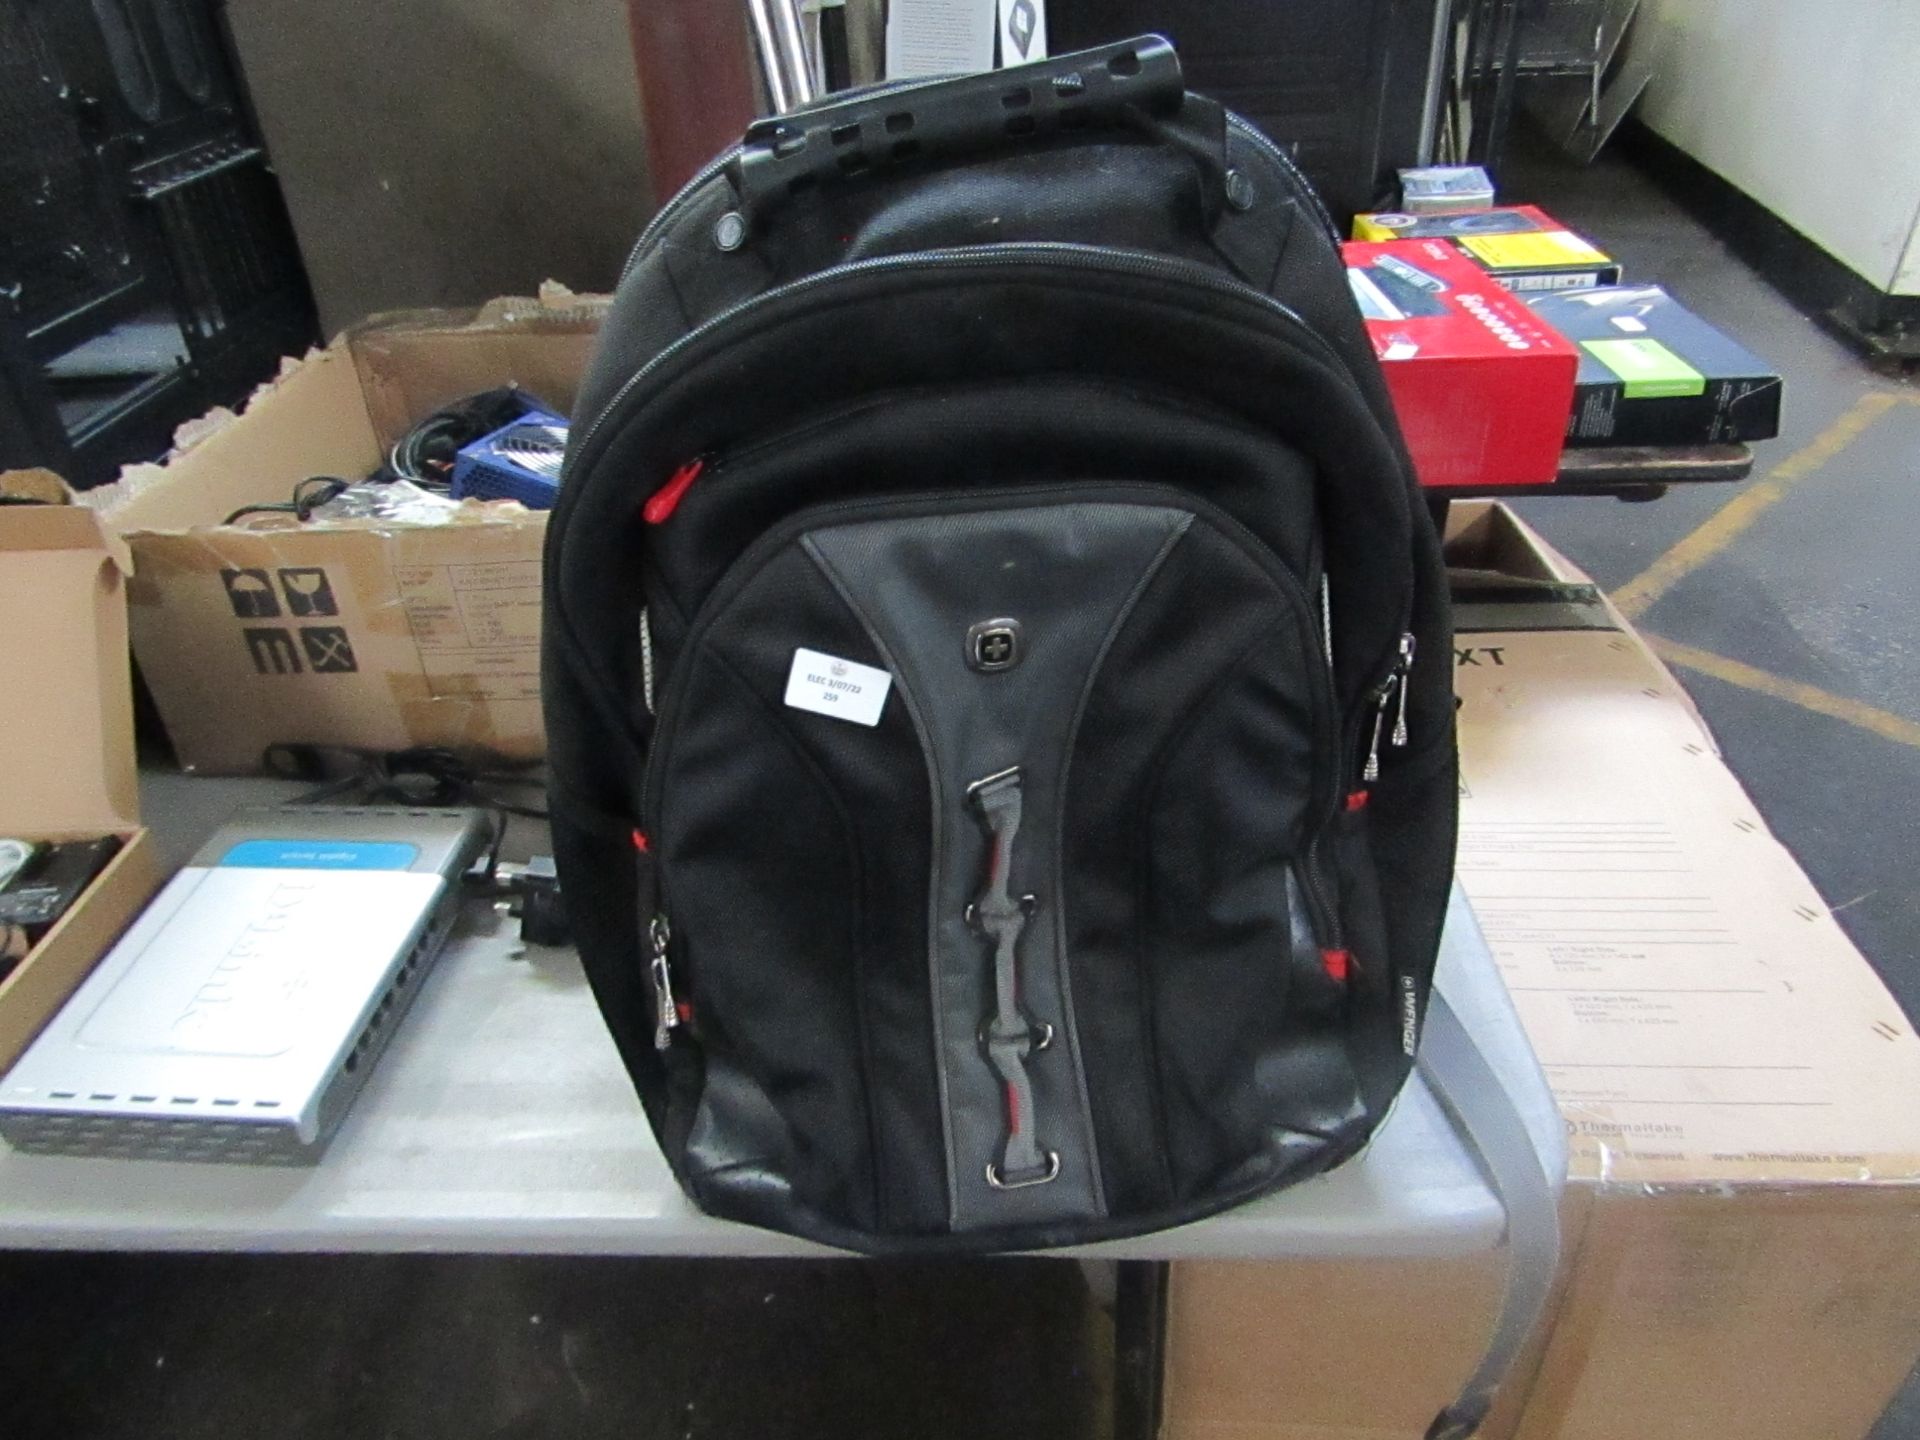 Wenger Swiss Militery Lap top back pack, used but still has life left In it